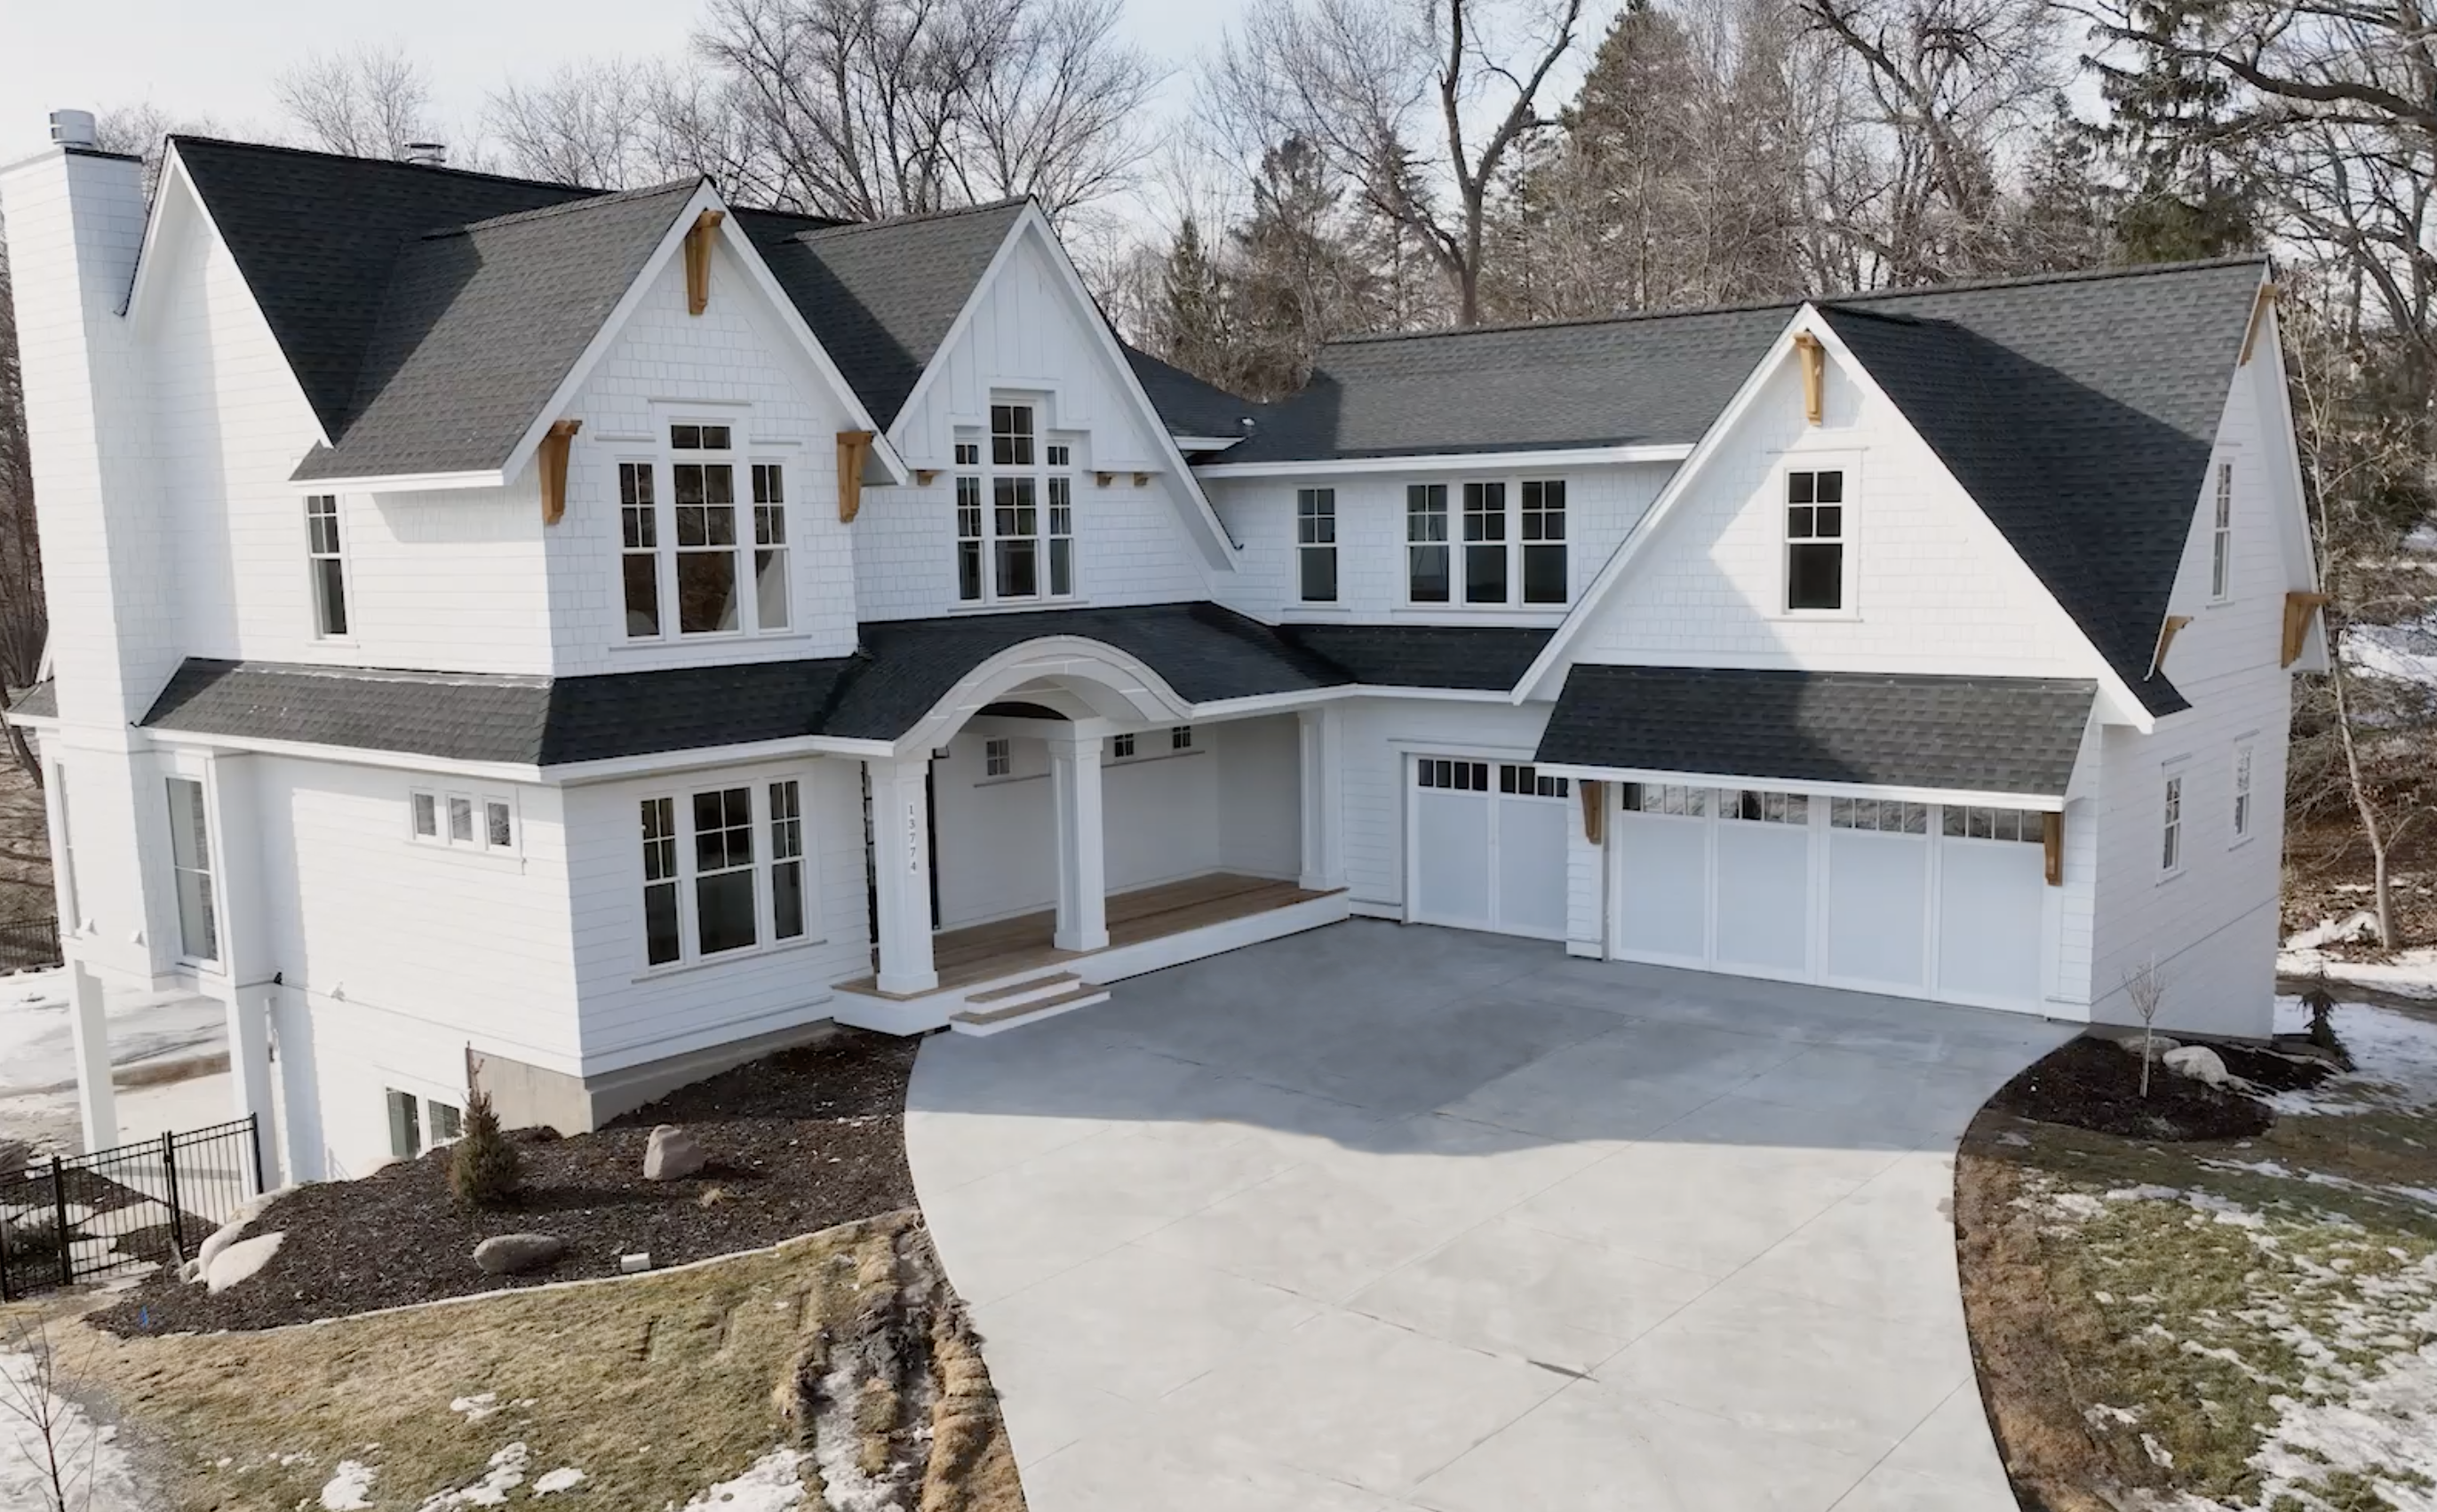 An aerial view of a Minnetonka dream home in the snow.